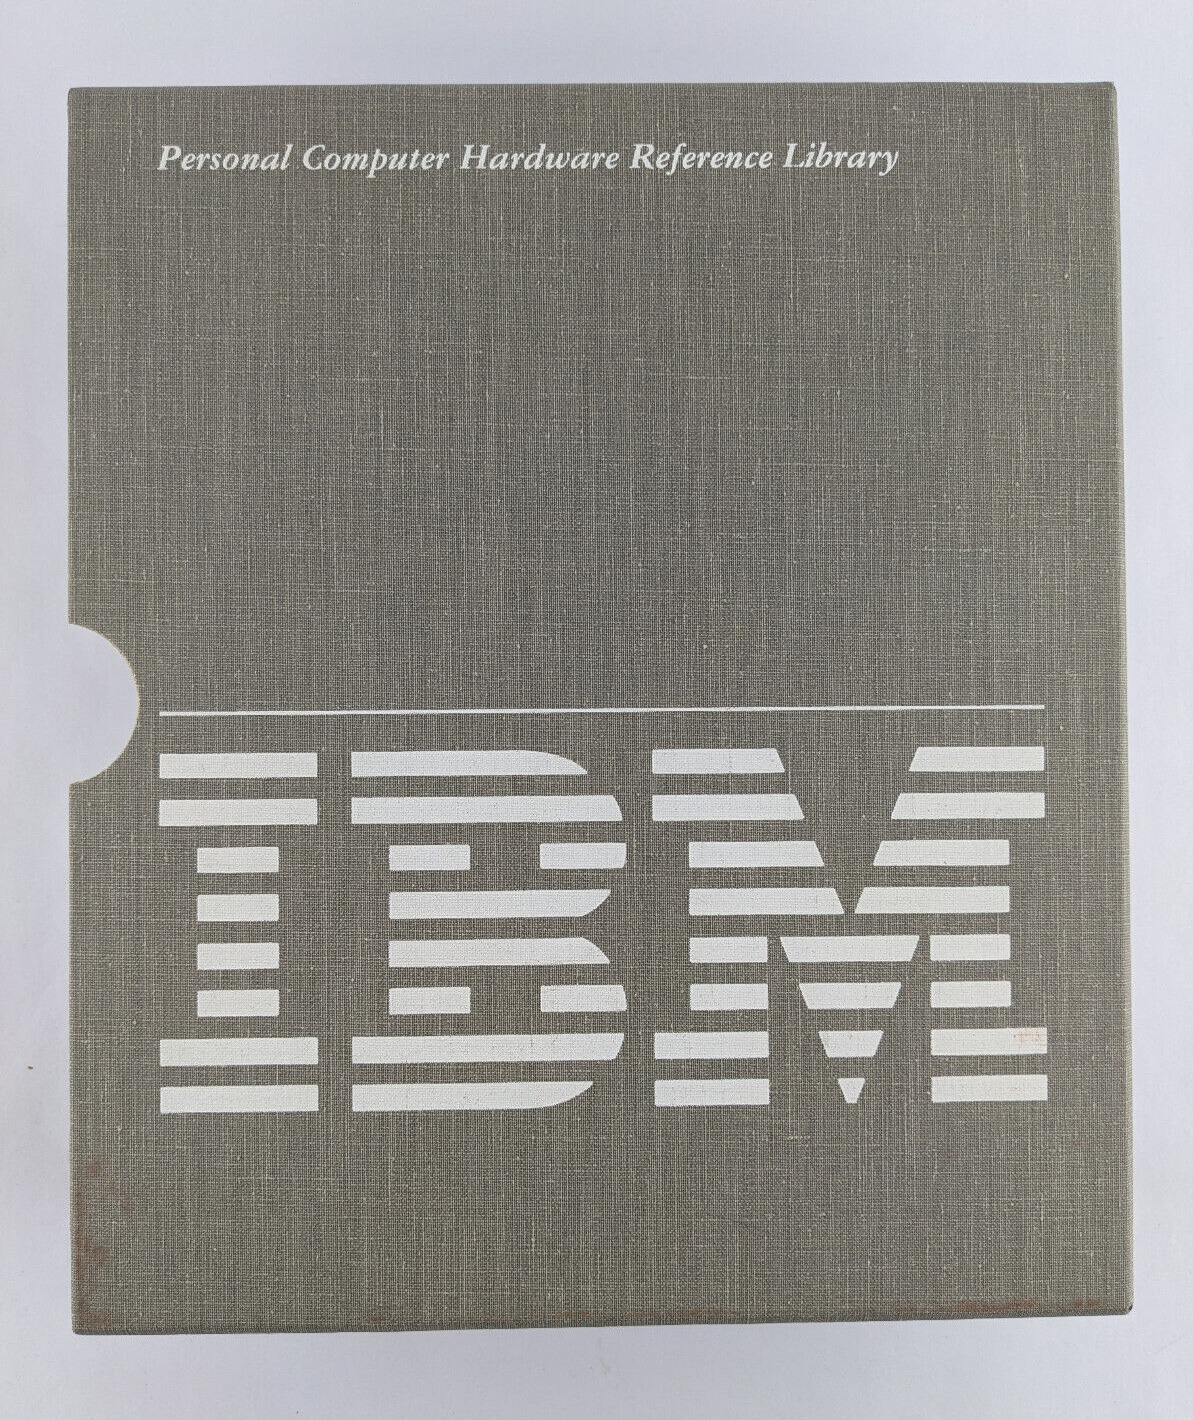 Vintage IBM Basic Personal Computer Library Book Sleeve - Clean Very Good Condit